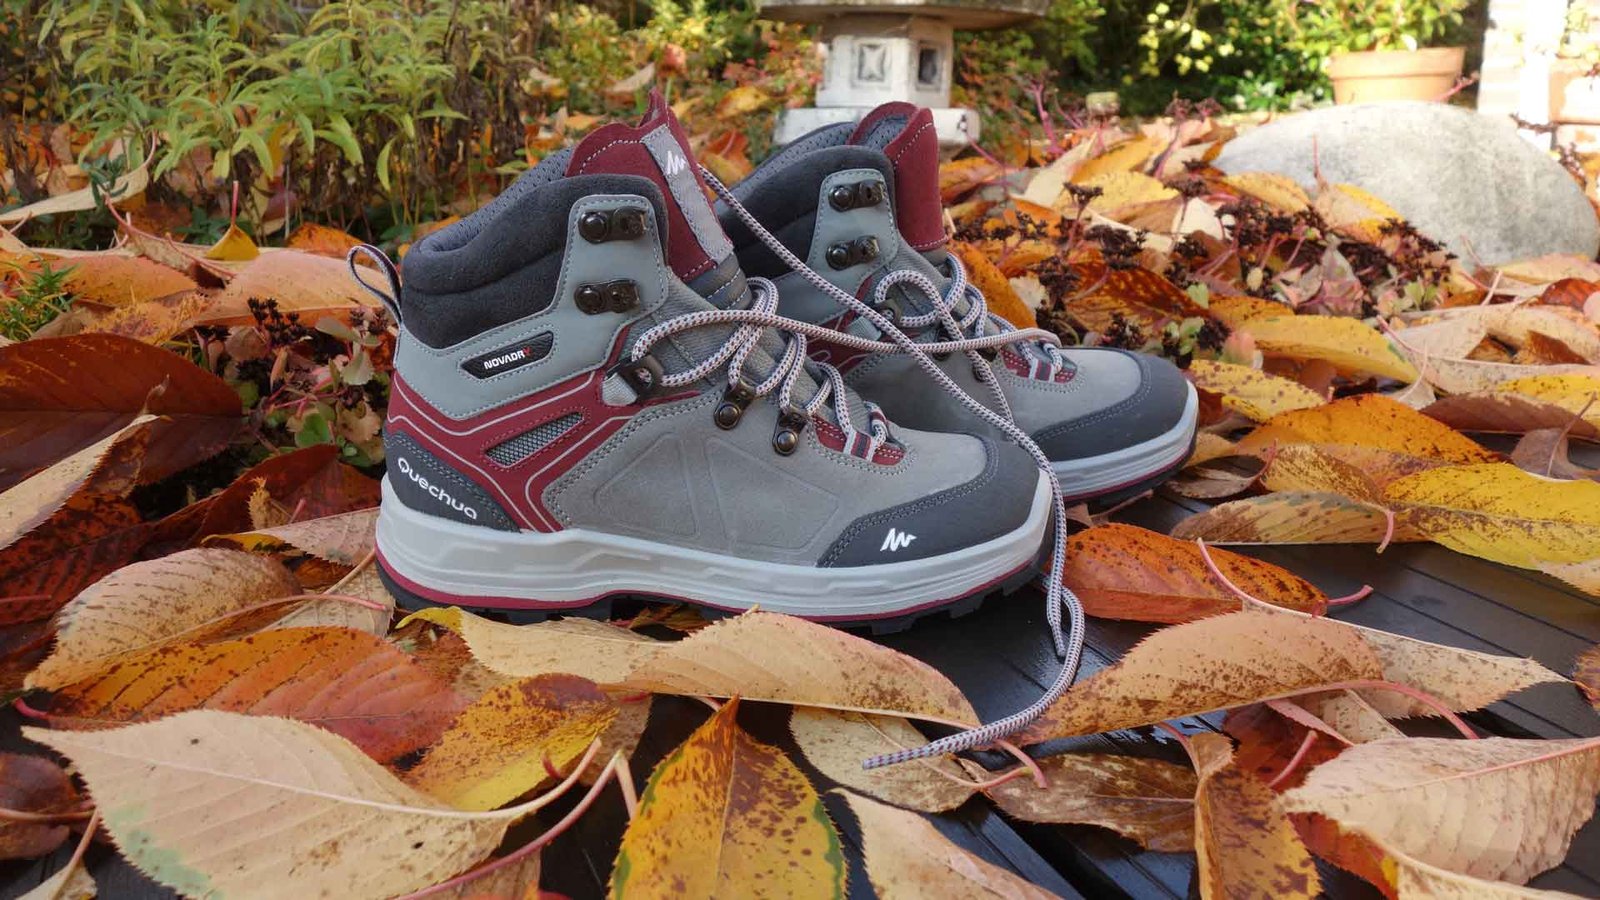 Get The Suitable One of Walking Boots & Walking Shoes